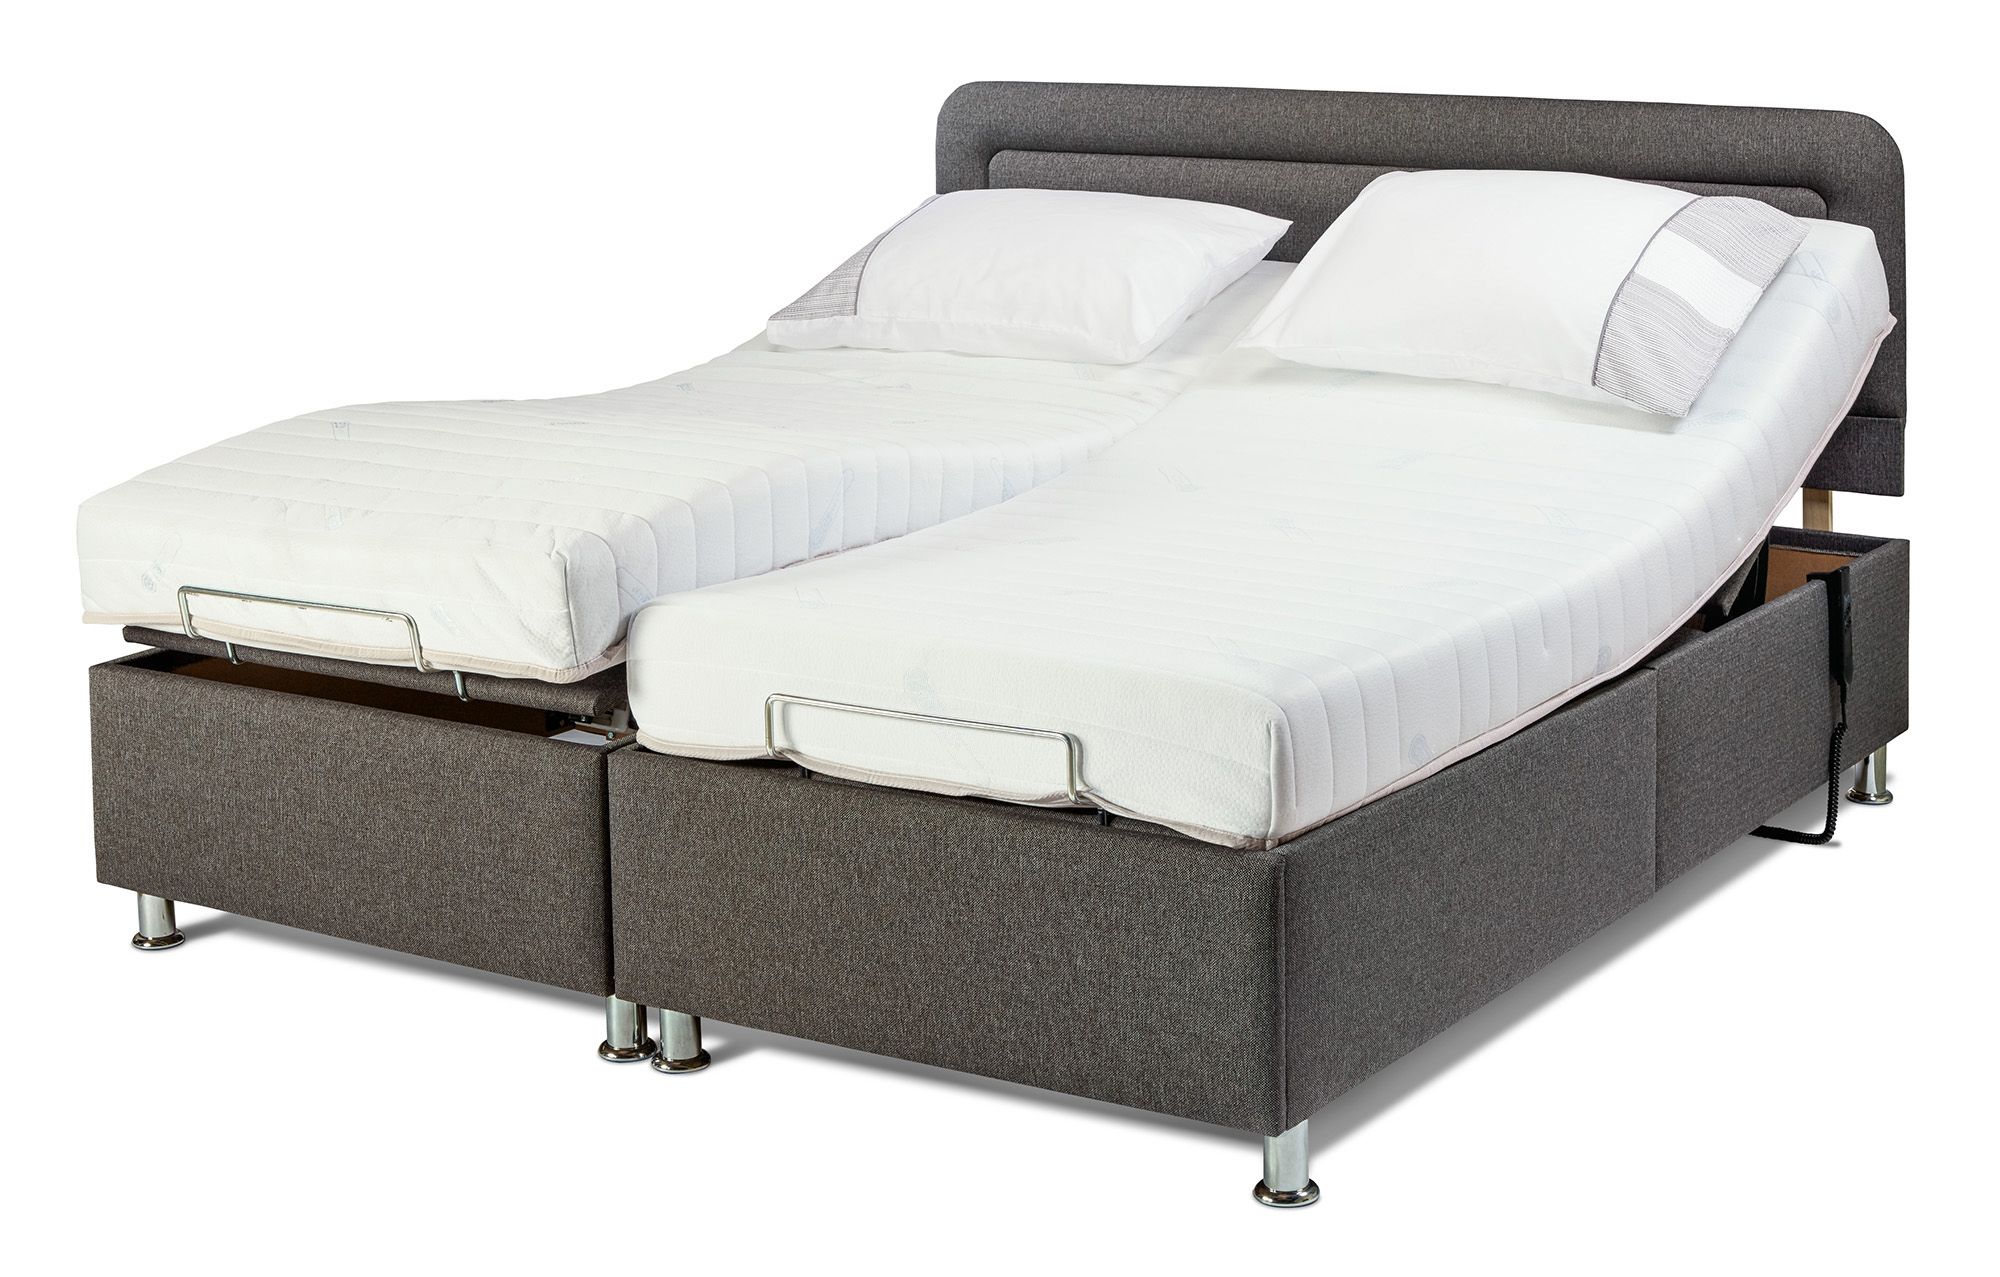 adjustable mattress that fit your bed frame